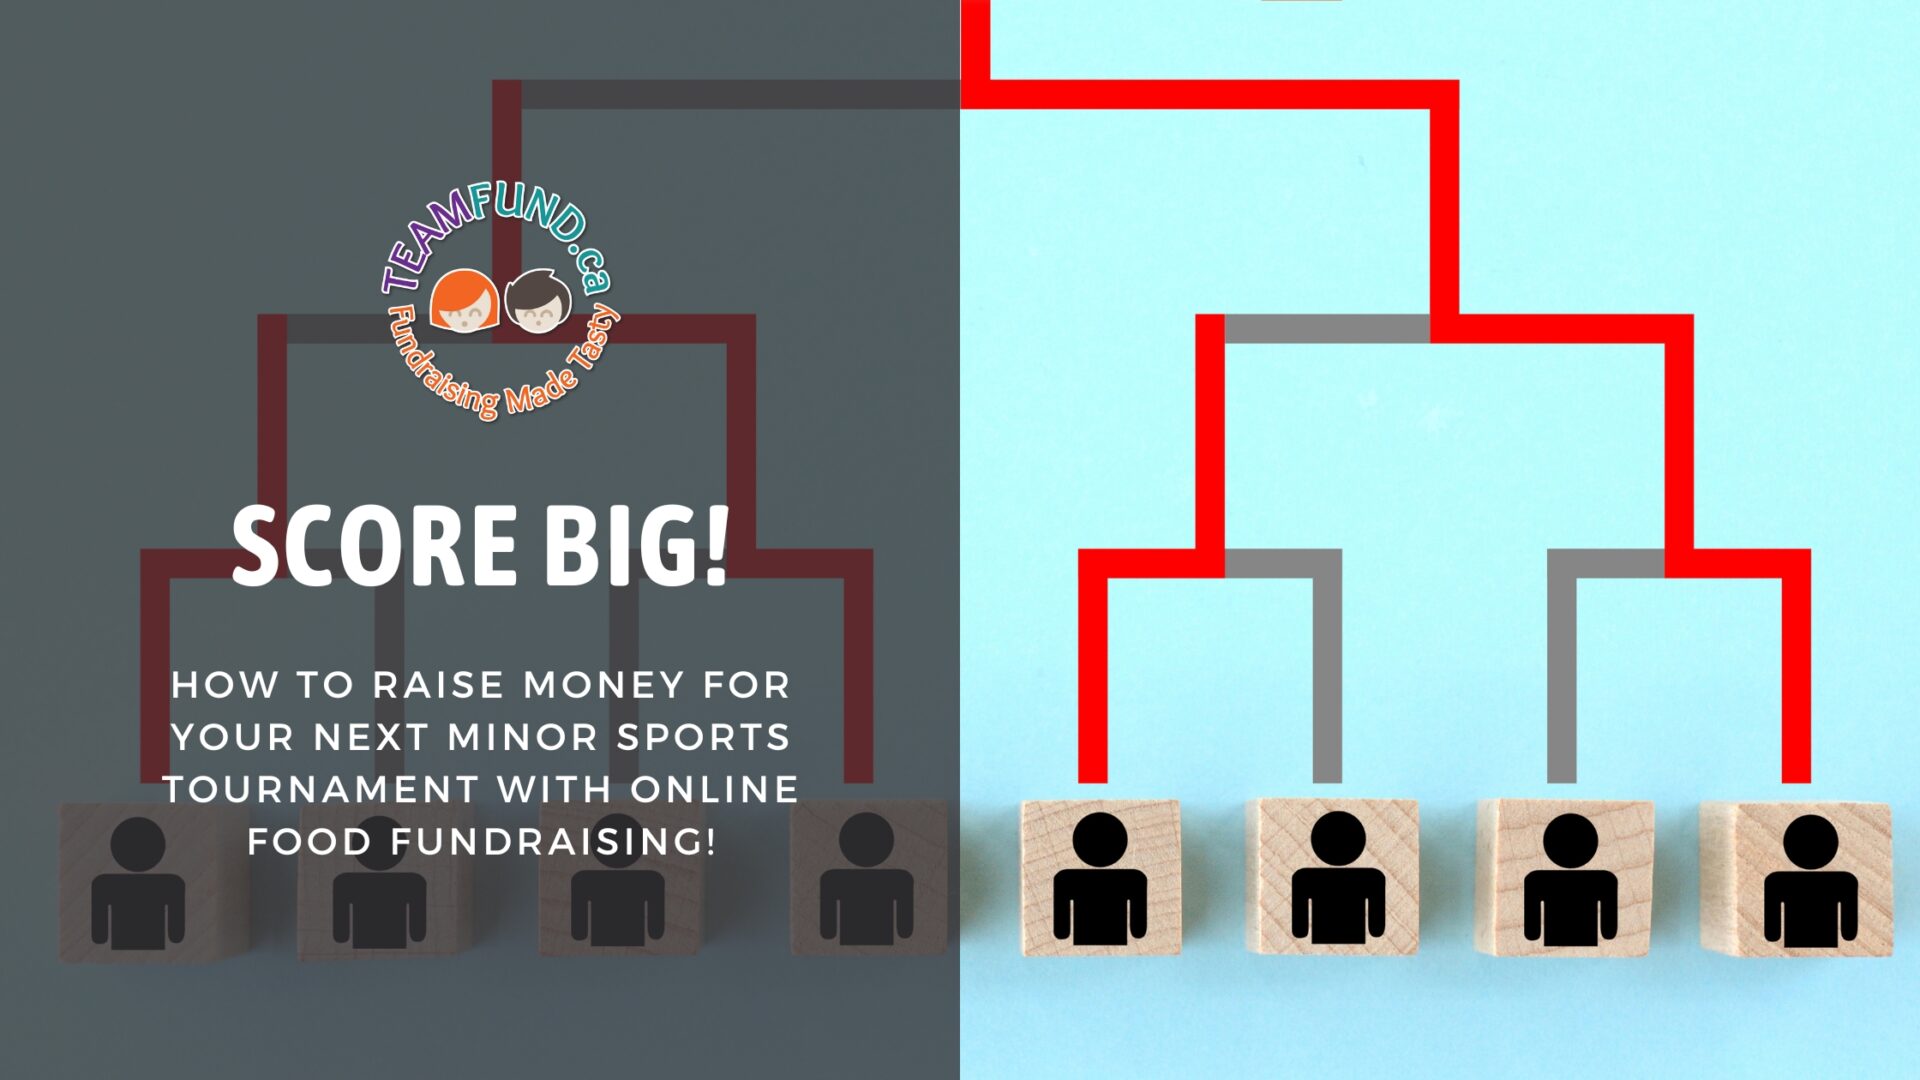 Score Big: How to Raise Money for Your Minor Sports Tournament with Online Food Fundraising